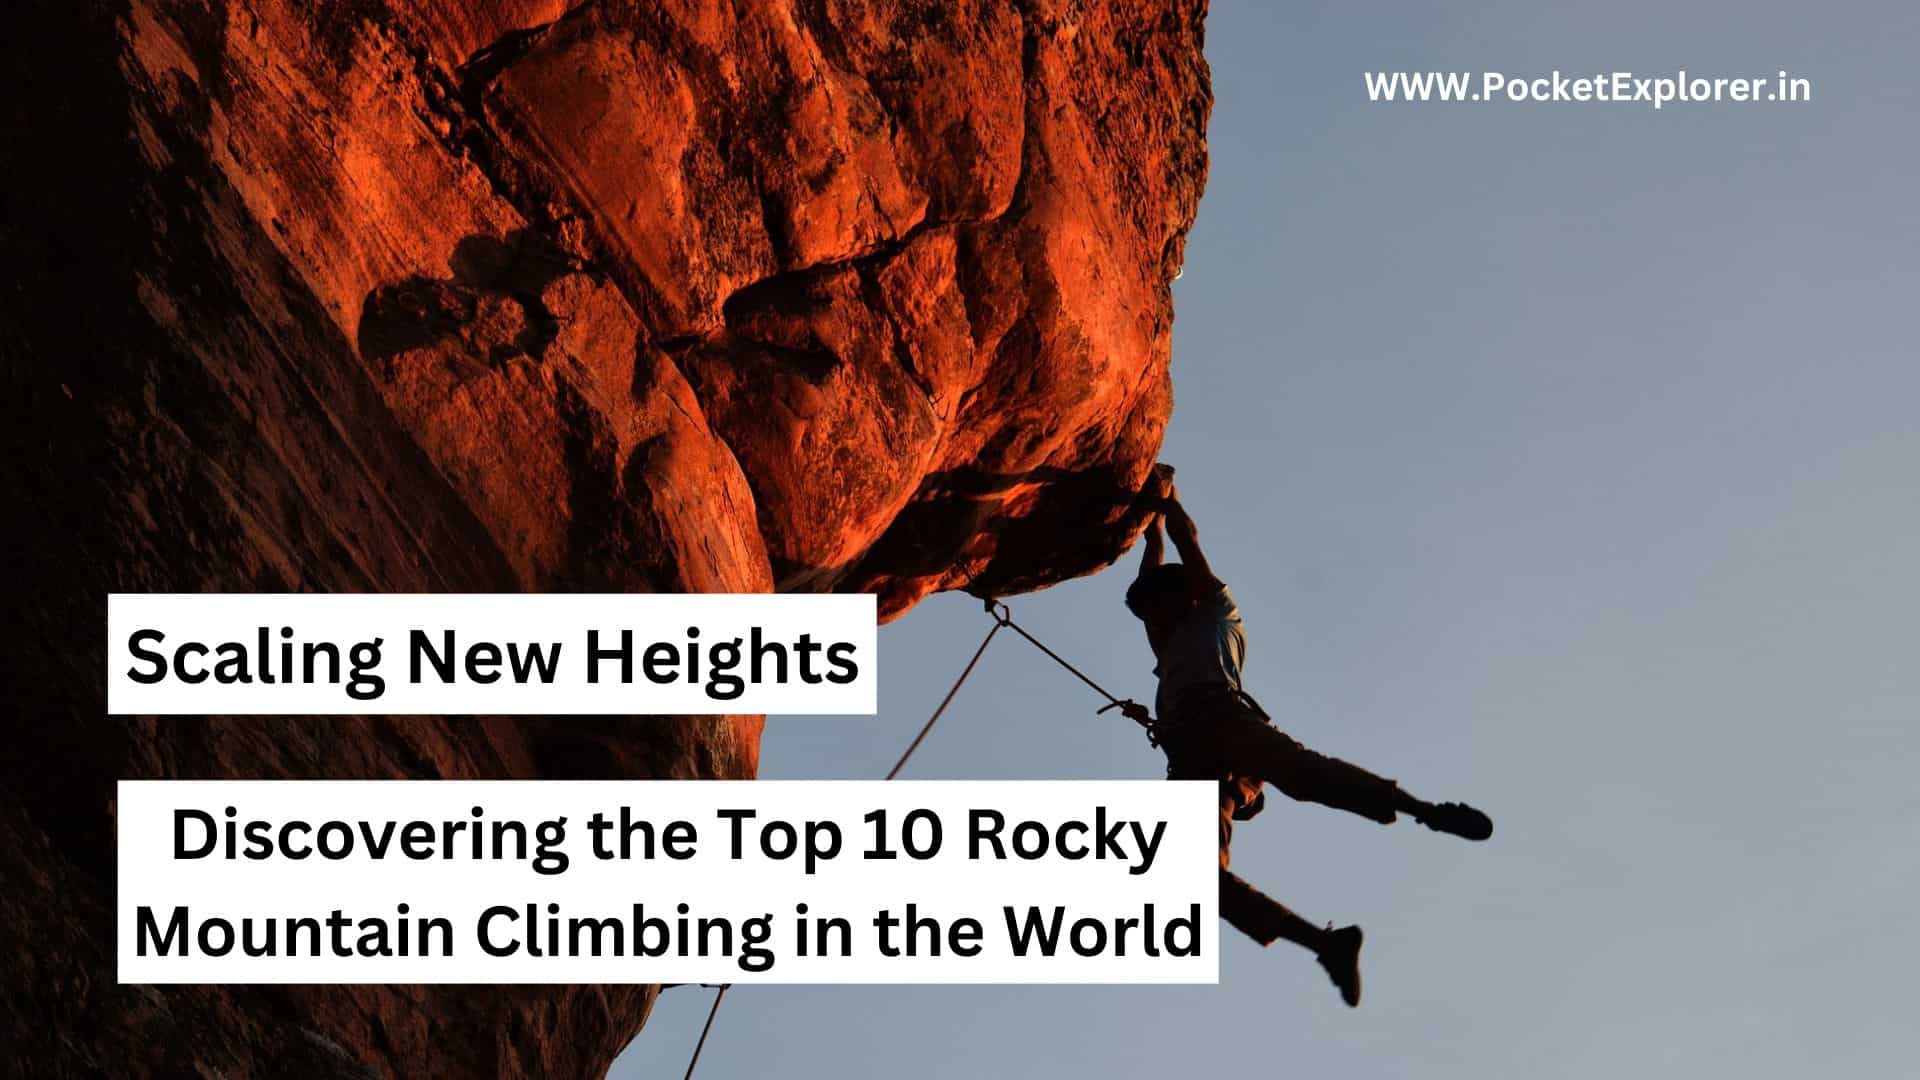 Scaling New Heights: Discovering the Top 10 Rocky Mountain Climbing in the World